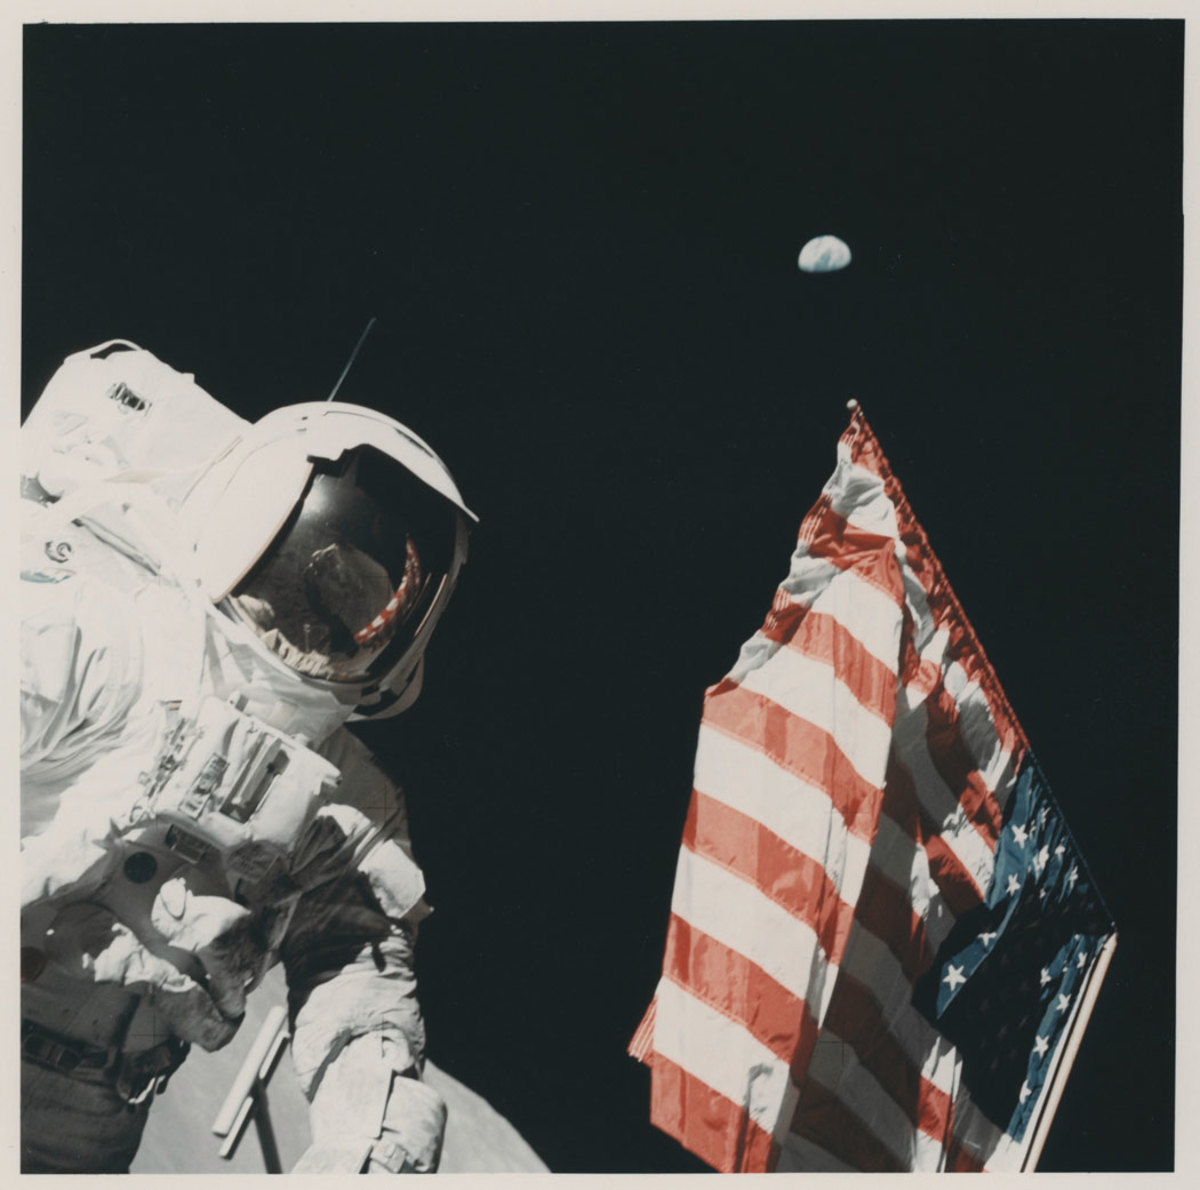 During the final mission of NASA’s Apollo program (December 7-19, 1972), Apollo 17 Astronaut Harrison “Jack” Schmitt stands on the moon beside the U.S. flag planted by him and Mission Commander Eugene A. Cernan, whose image reflects in Schmitt’s visor. A beckoning Earth floats nearly a quarter of a million miles away. The image sold at auction for $3,750.